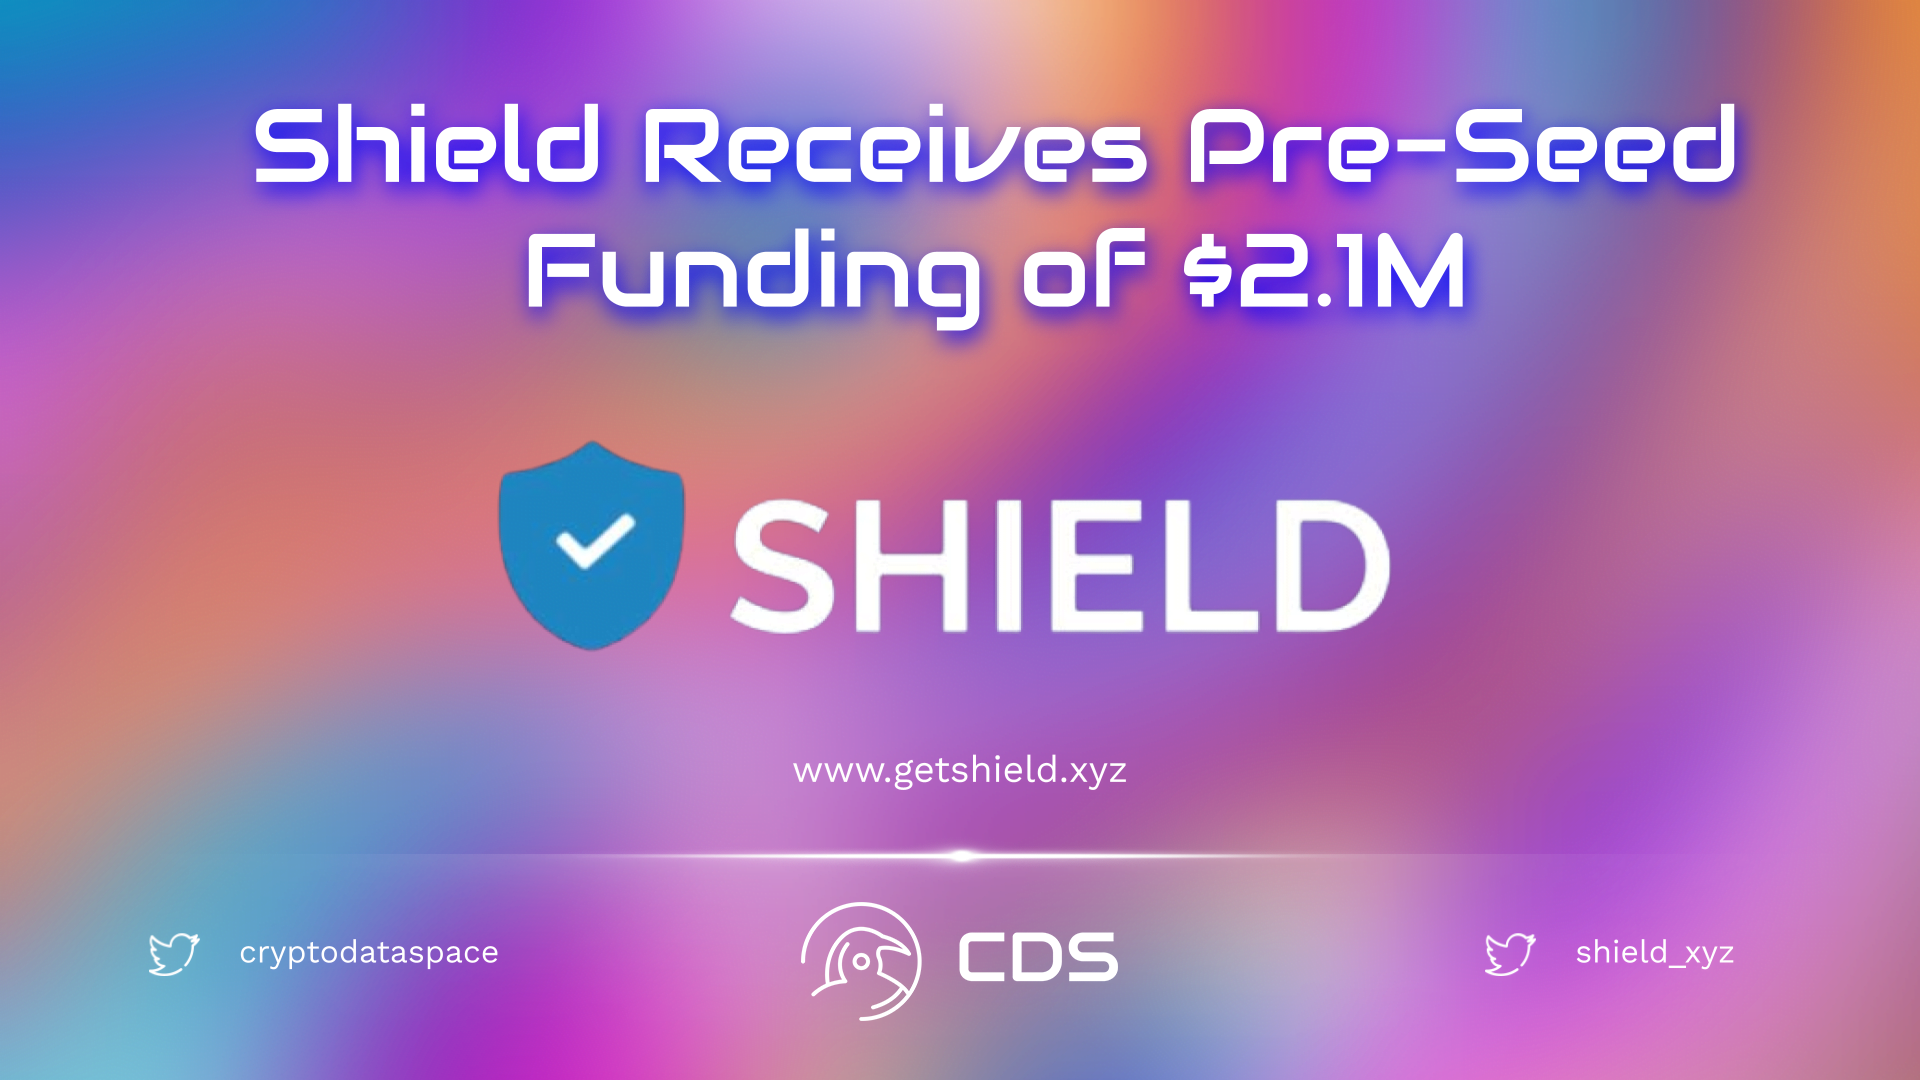 Shield Receives Pre-Seed Funding of $2.1M